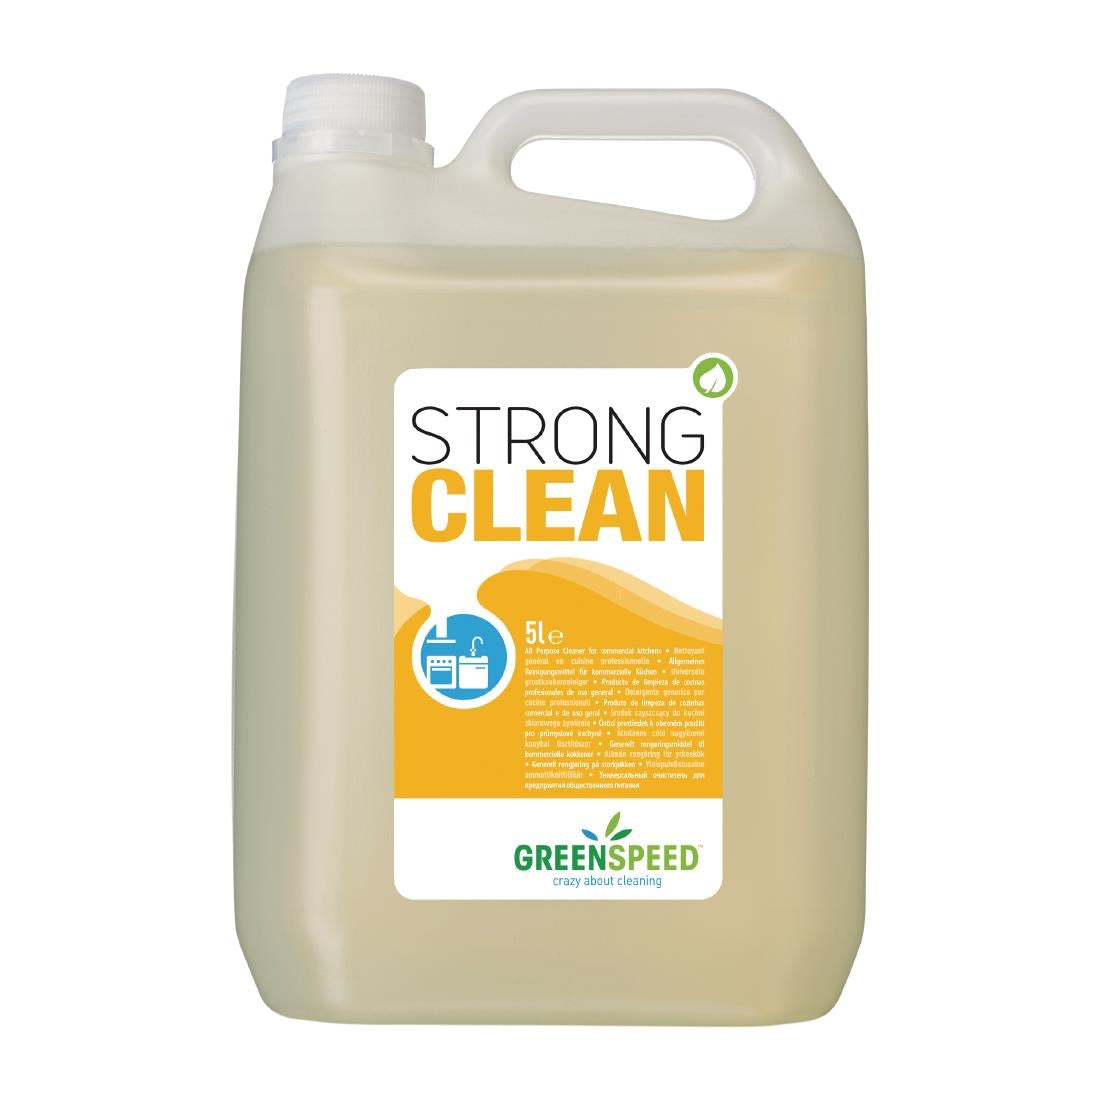 CX183 Greenspeed Kitchen Cleaner and Degreaser Concentrate 5Ltr JD Catering Equipment Solutions Ltd